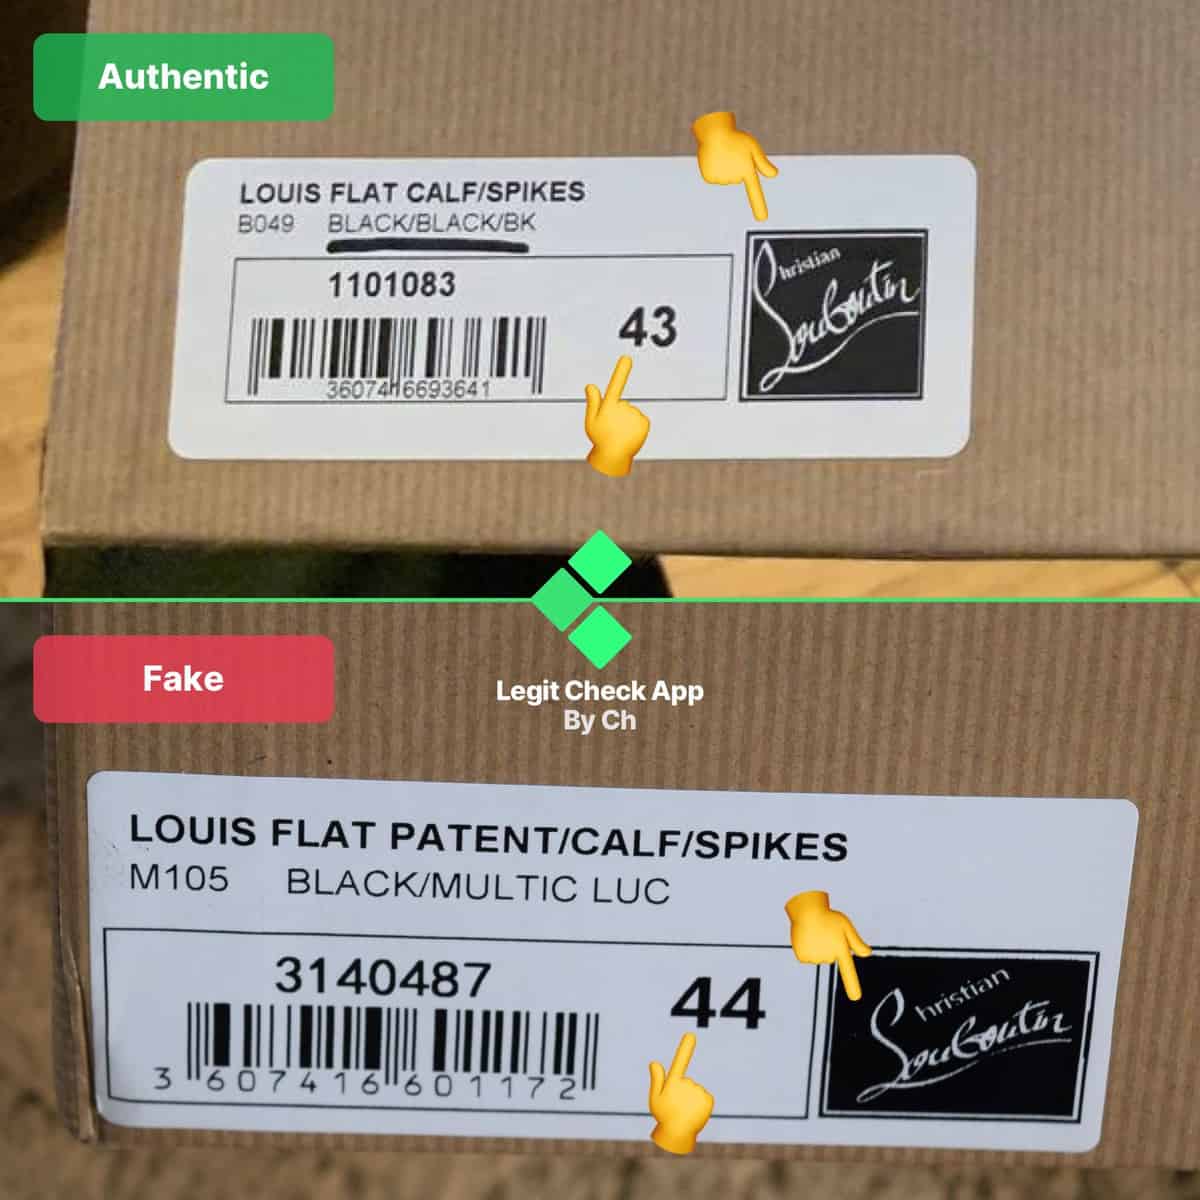 Louboutin: Real vs Fake - How to tell if Louboutins are real?